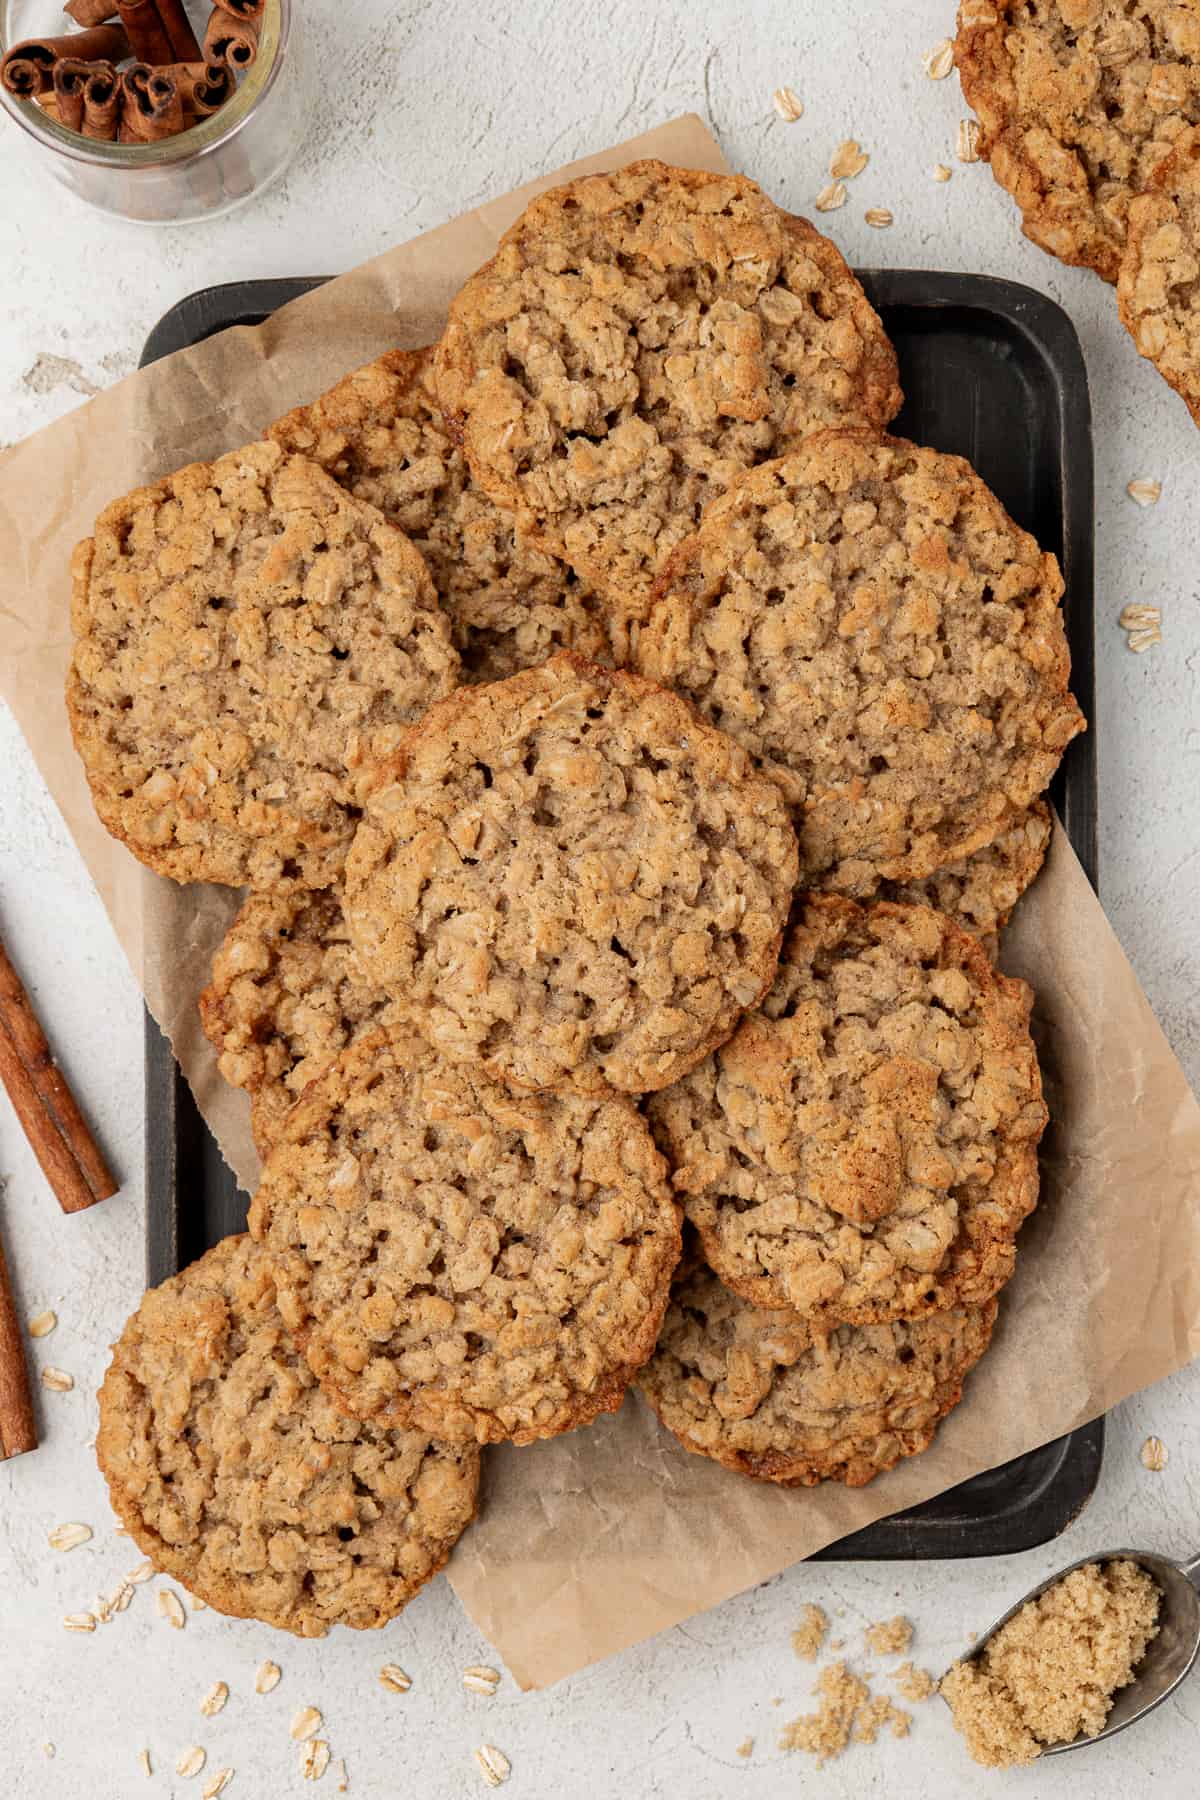 a sheet pan with parchment paper and a pile of oatmeal cookies on top with cinnamon sticks, more cookies and a spoon of brown sugar around it